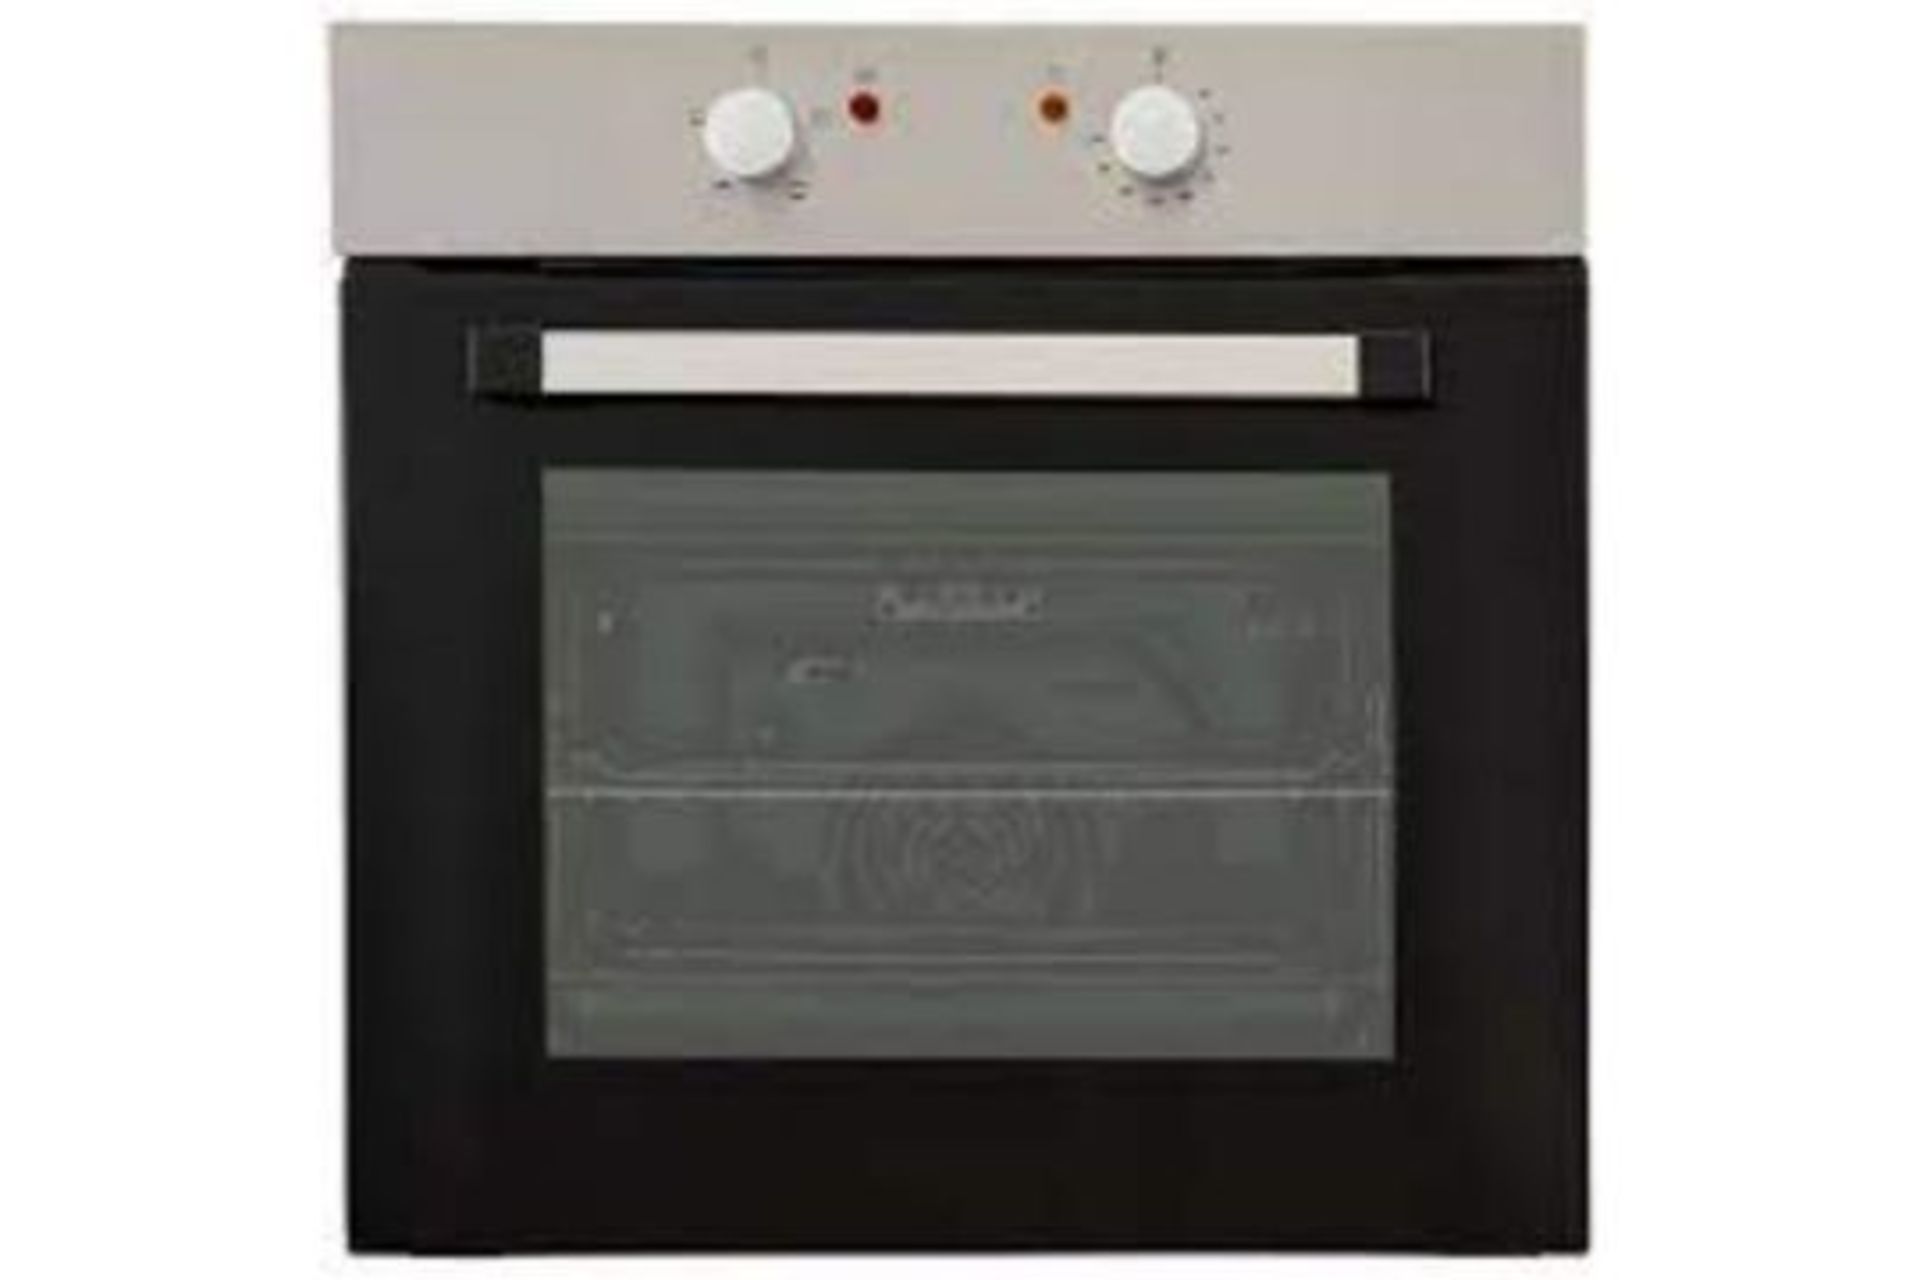 CSB60A Built-in Single Conventional Oven. This conventional, single oven has a 60L capacity with